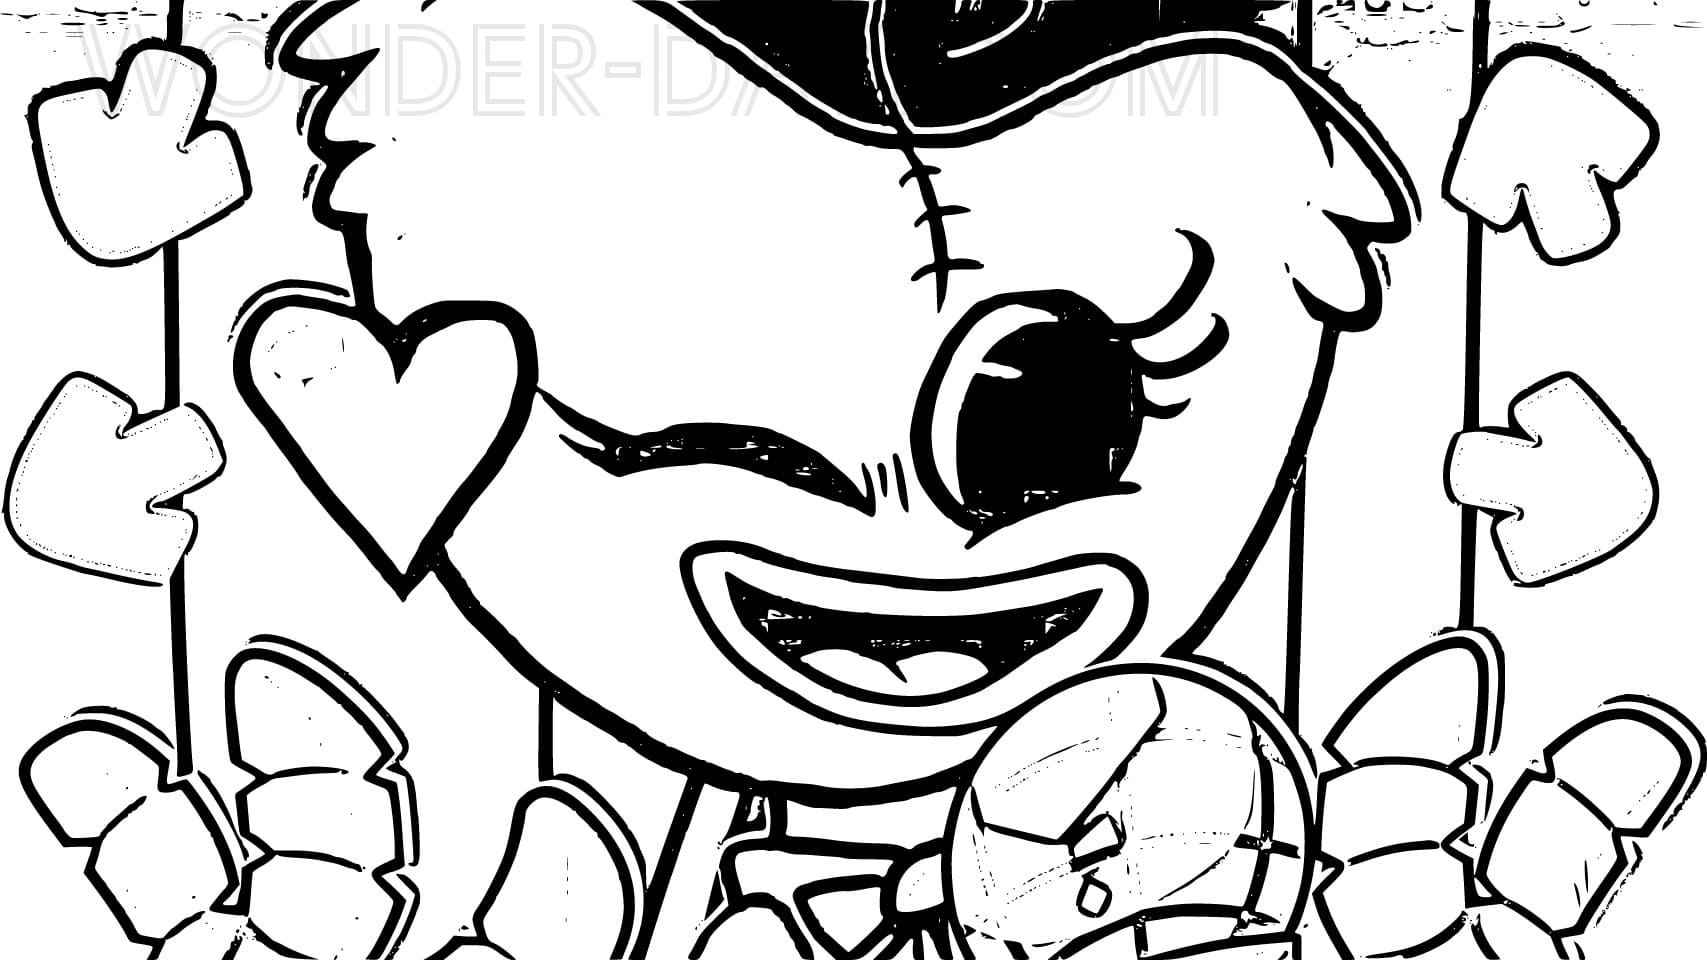 Kissy Missy Coloring Pages 30 Coloring Pages